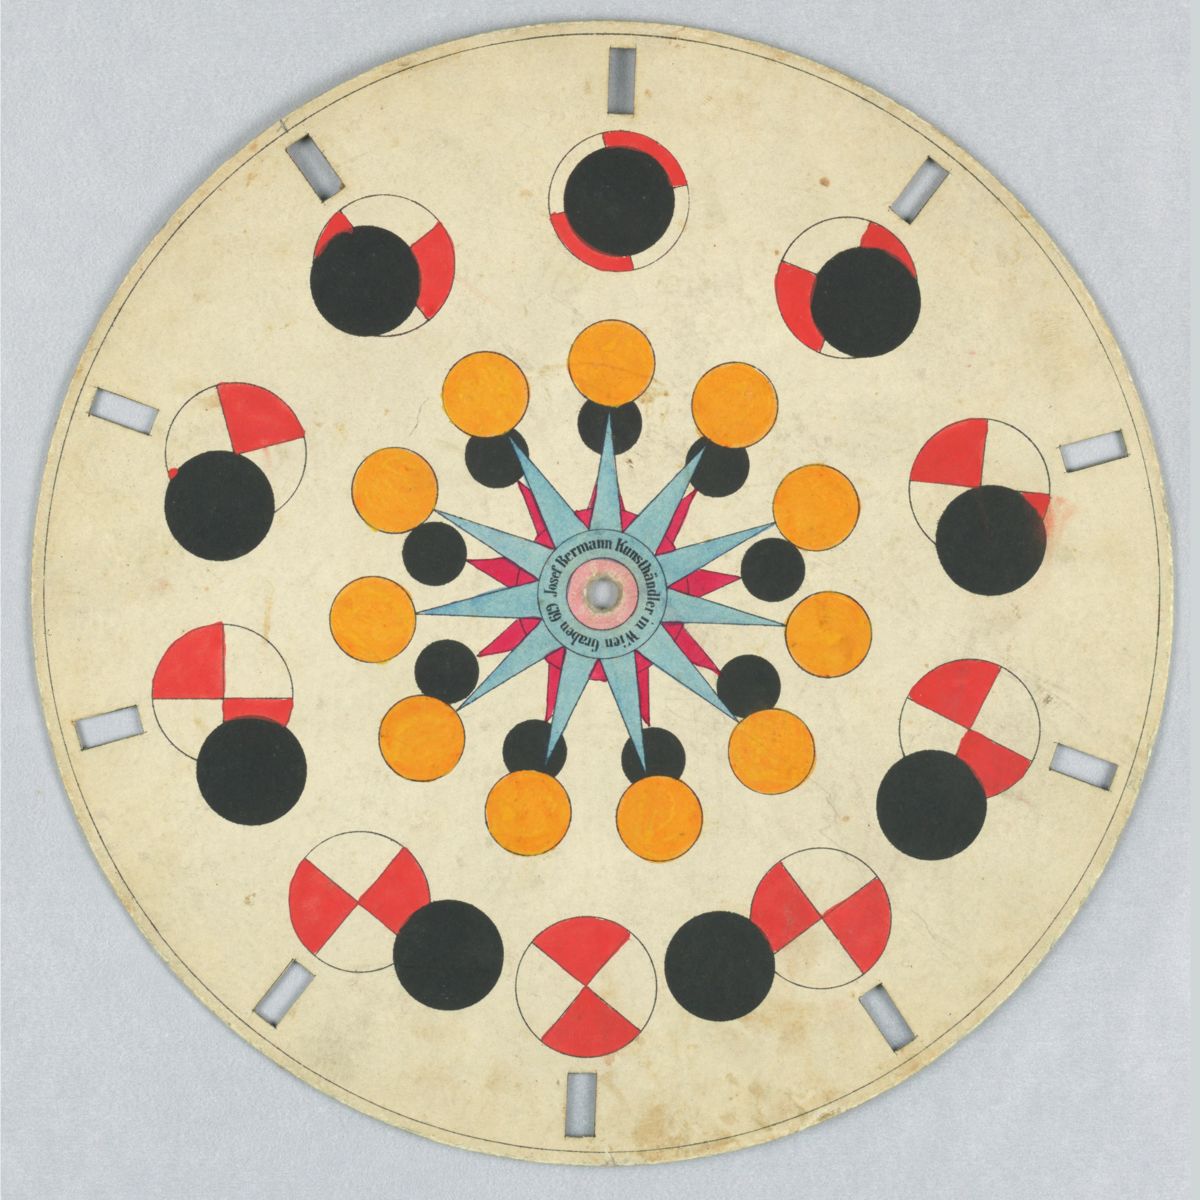 Optical Toy, Phenakistiscope Disc with Geometric Shapes c.1840 Cooper Hewitt Smithsonian Design Museum.